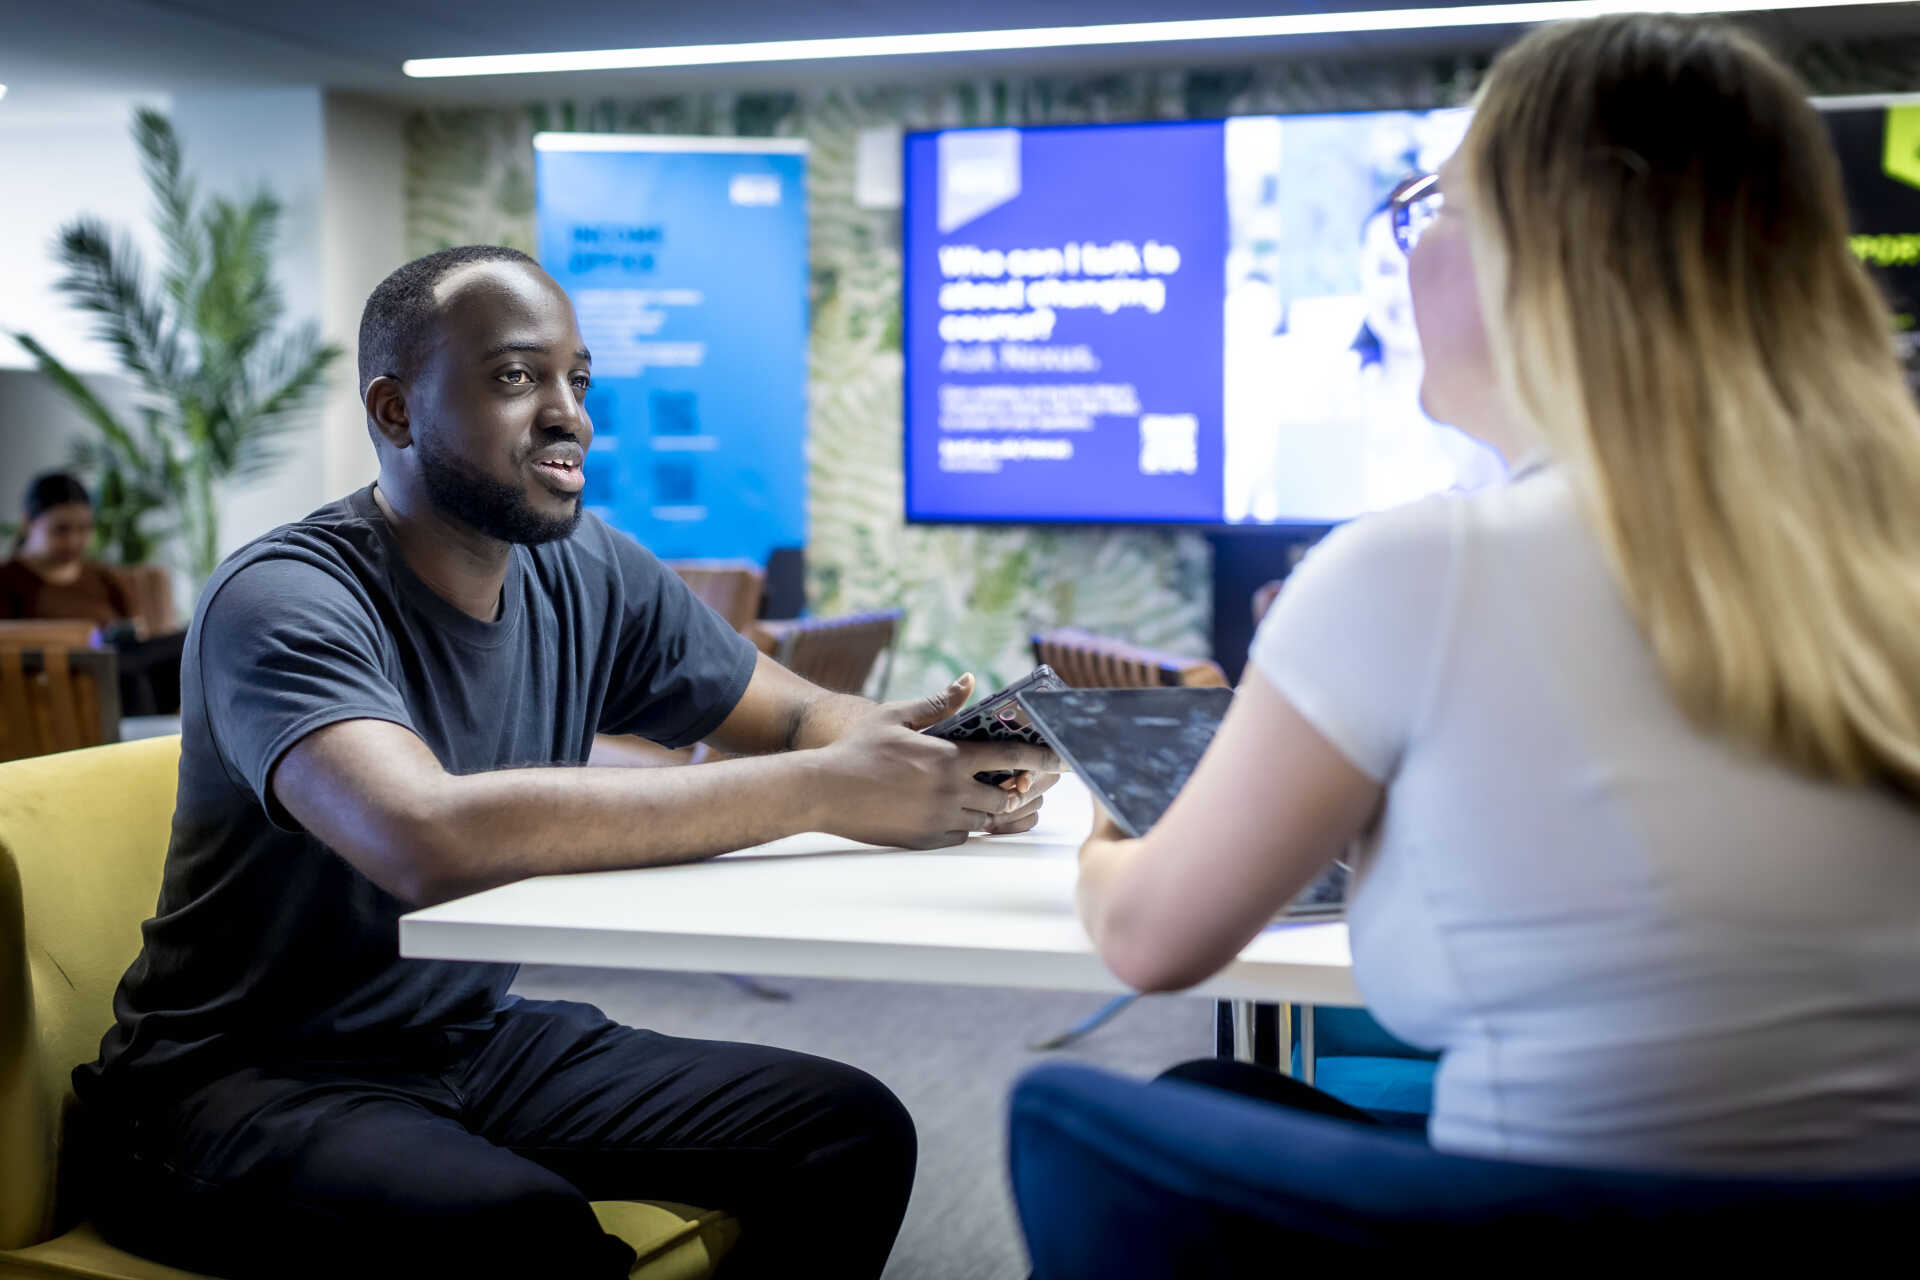 photo of young black man at a welcome desk speaking to a woman who is holding a tablet; display screen in background